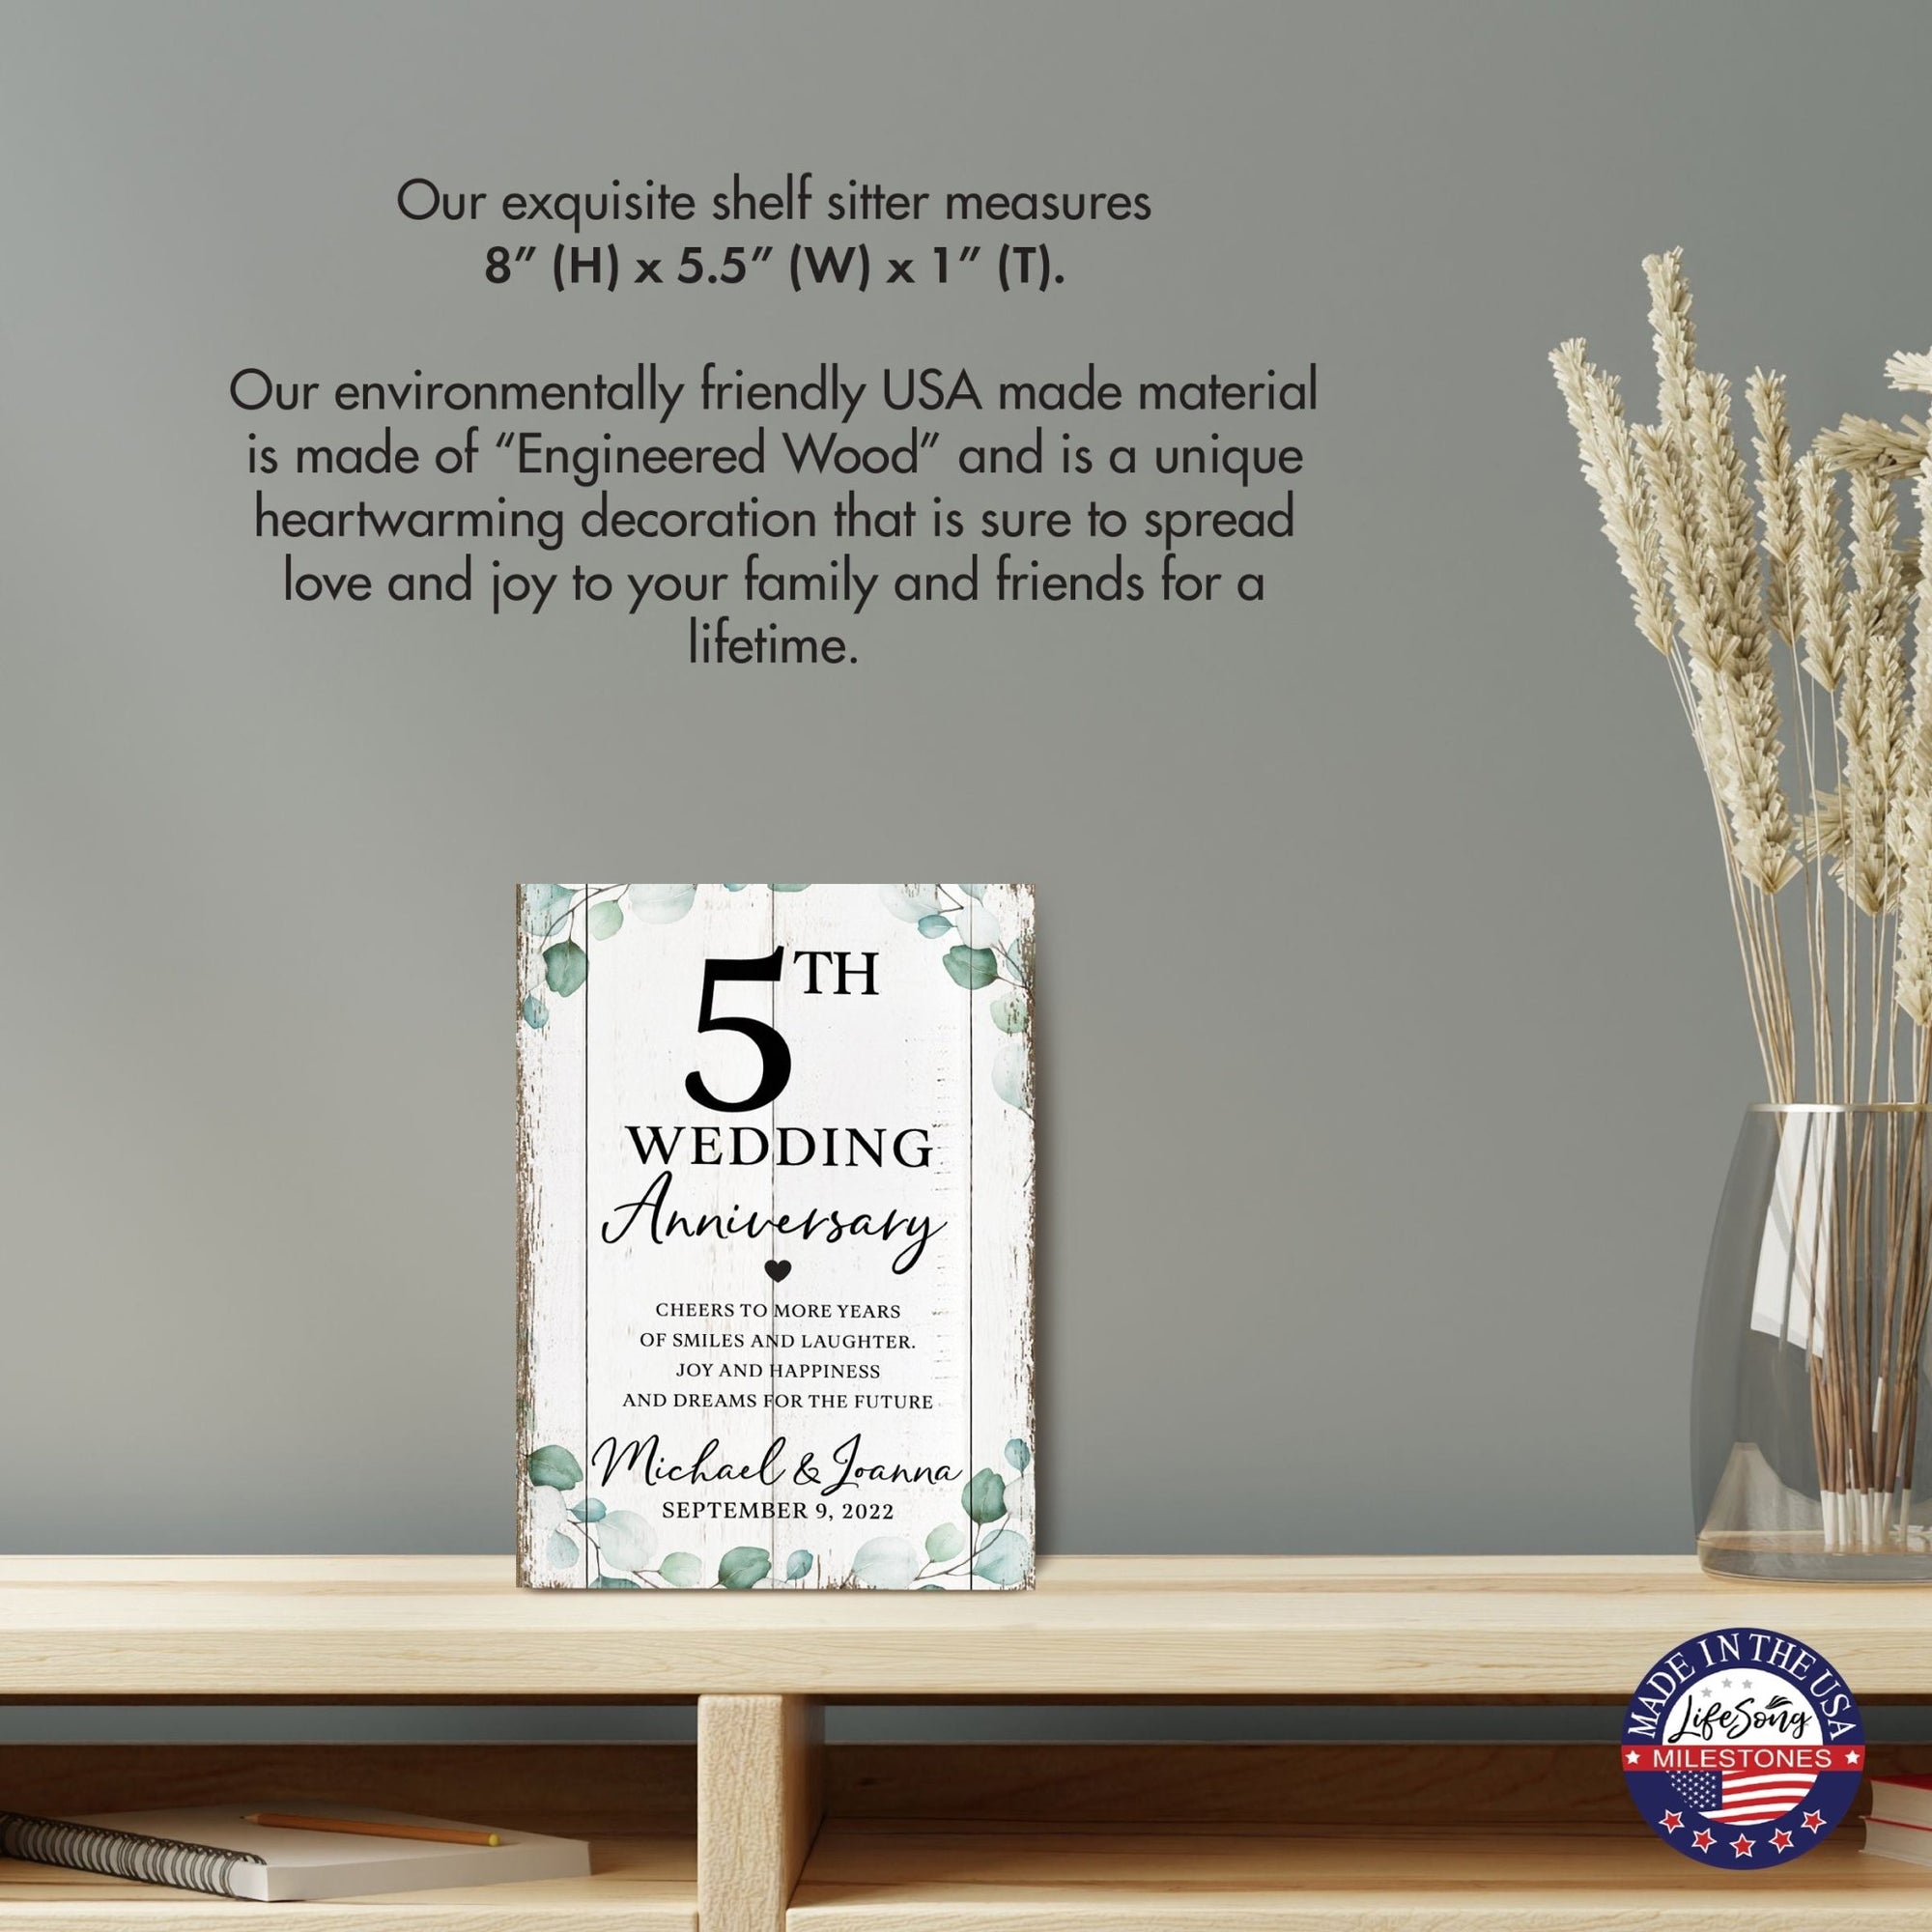 Wedding Anniversary Tabletop Home Decor - Elegant MDF wood sign with digital prints commemorating your 5th anniversary.